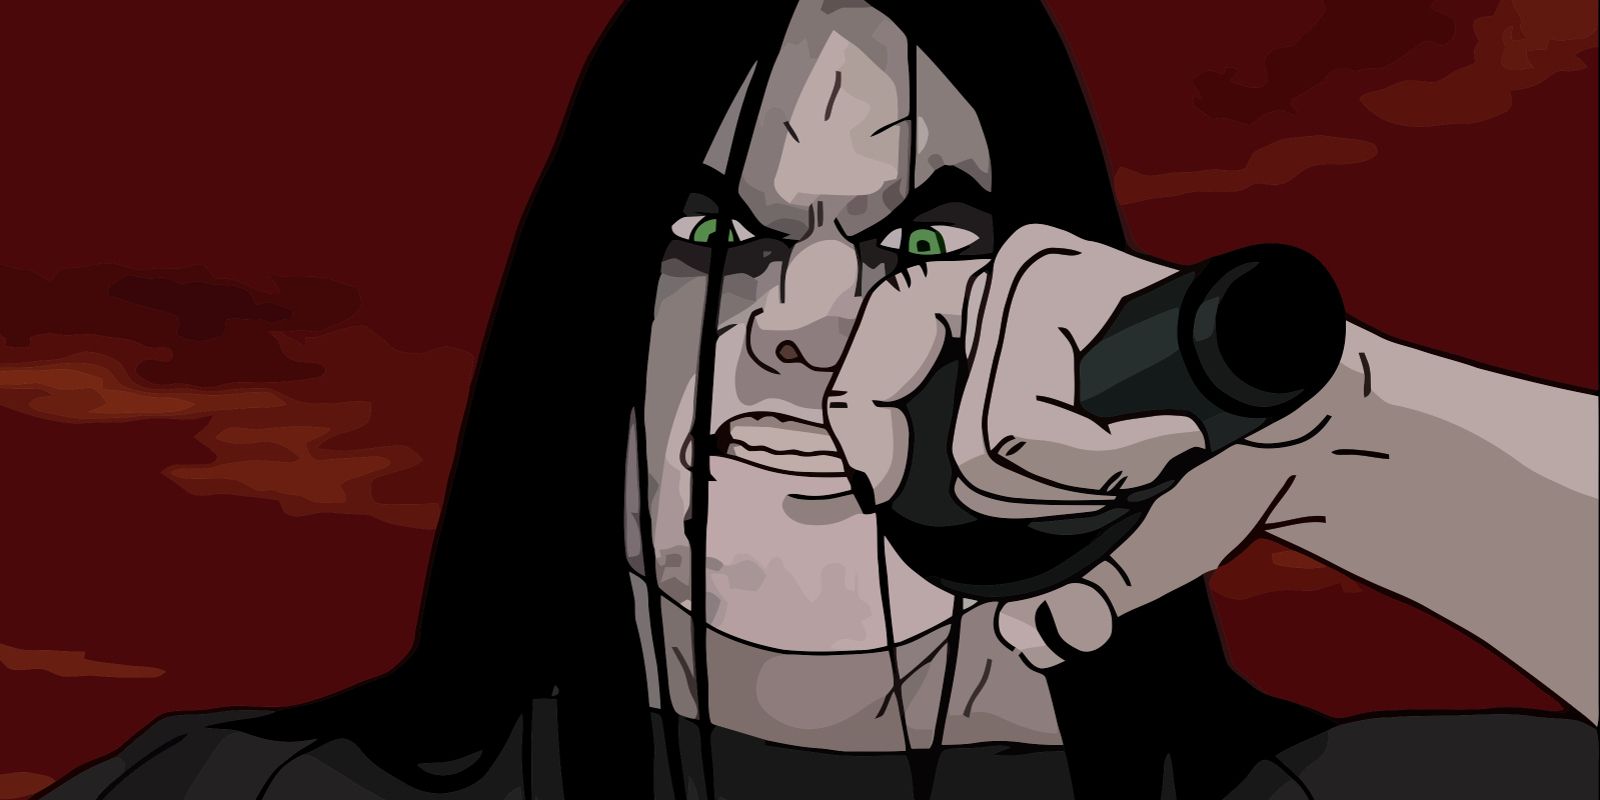 Nathan Explosion from the Adult Swim series Metalocalypse.